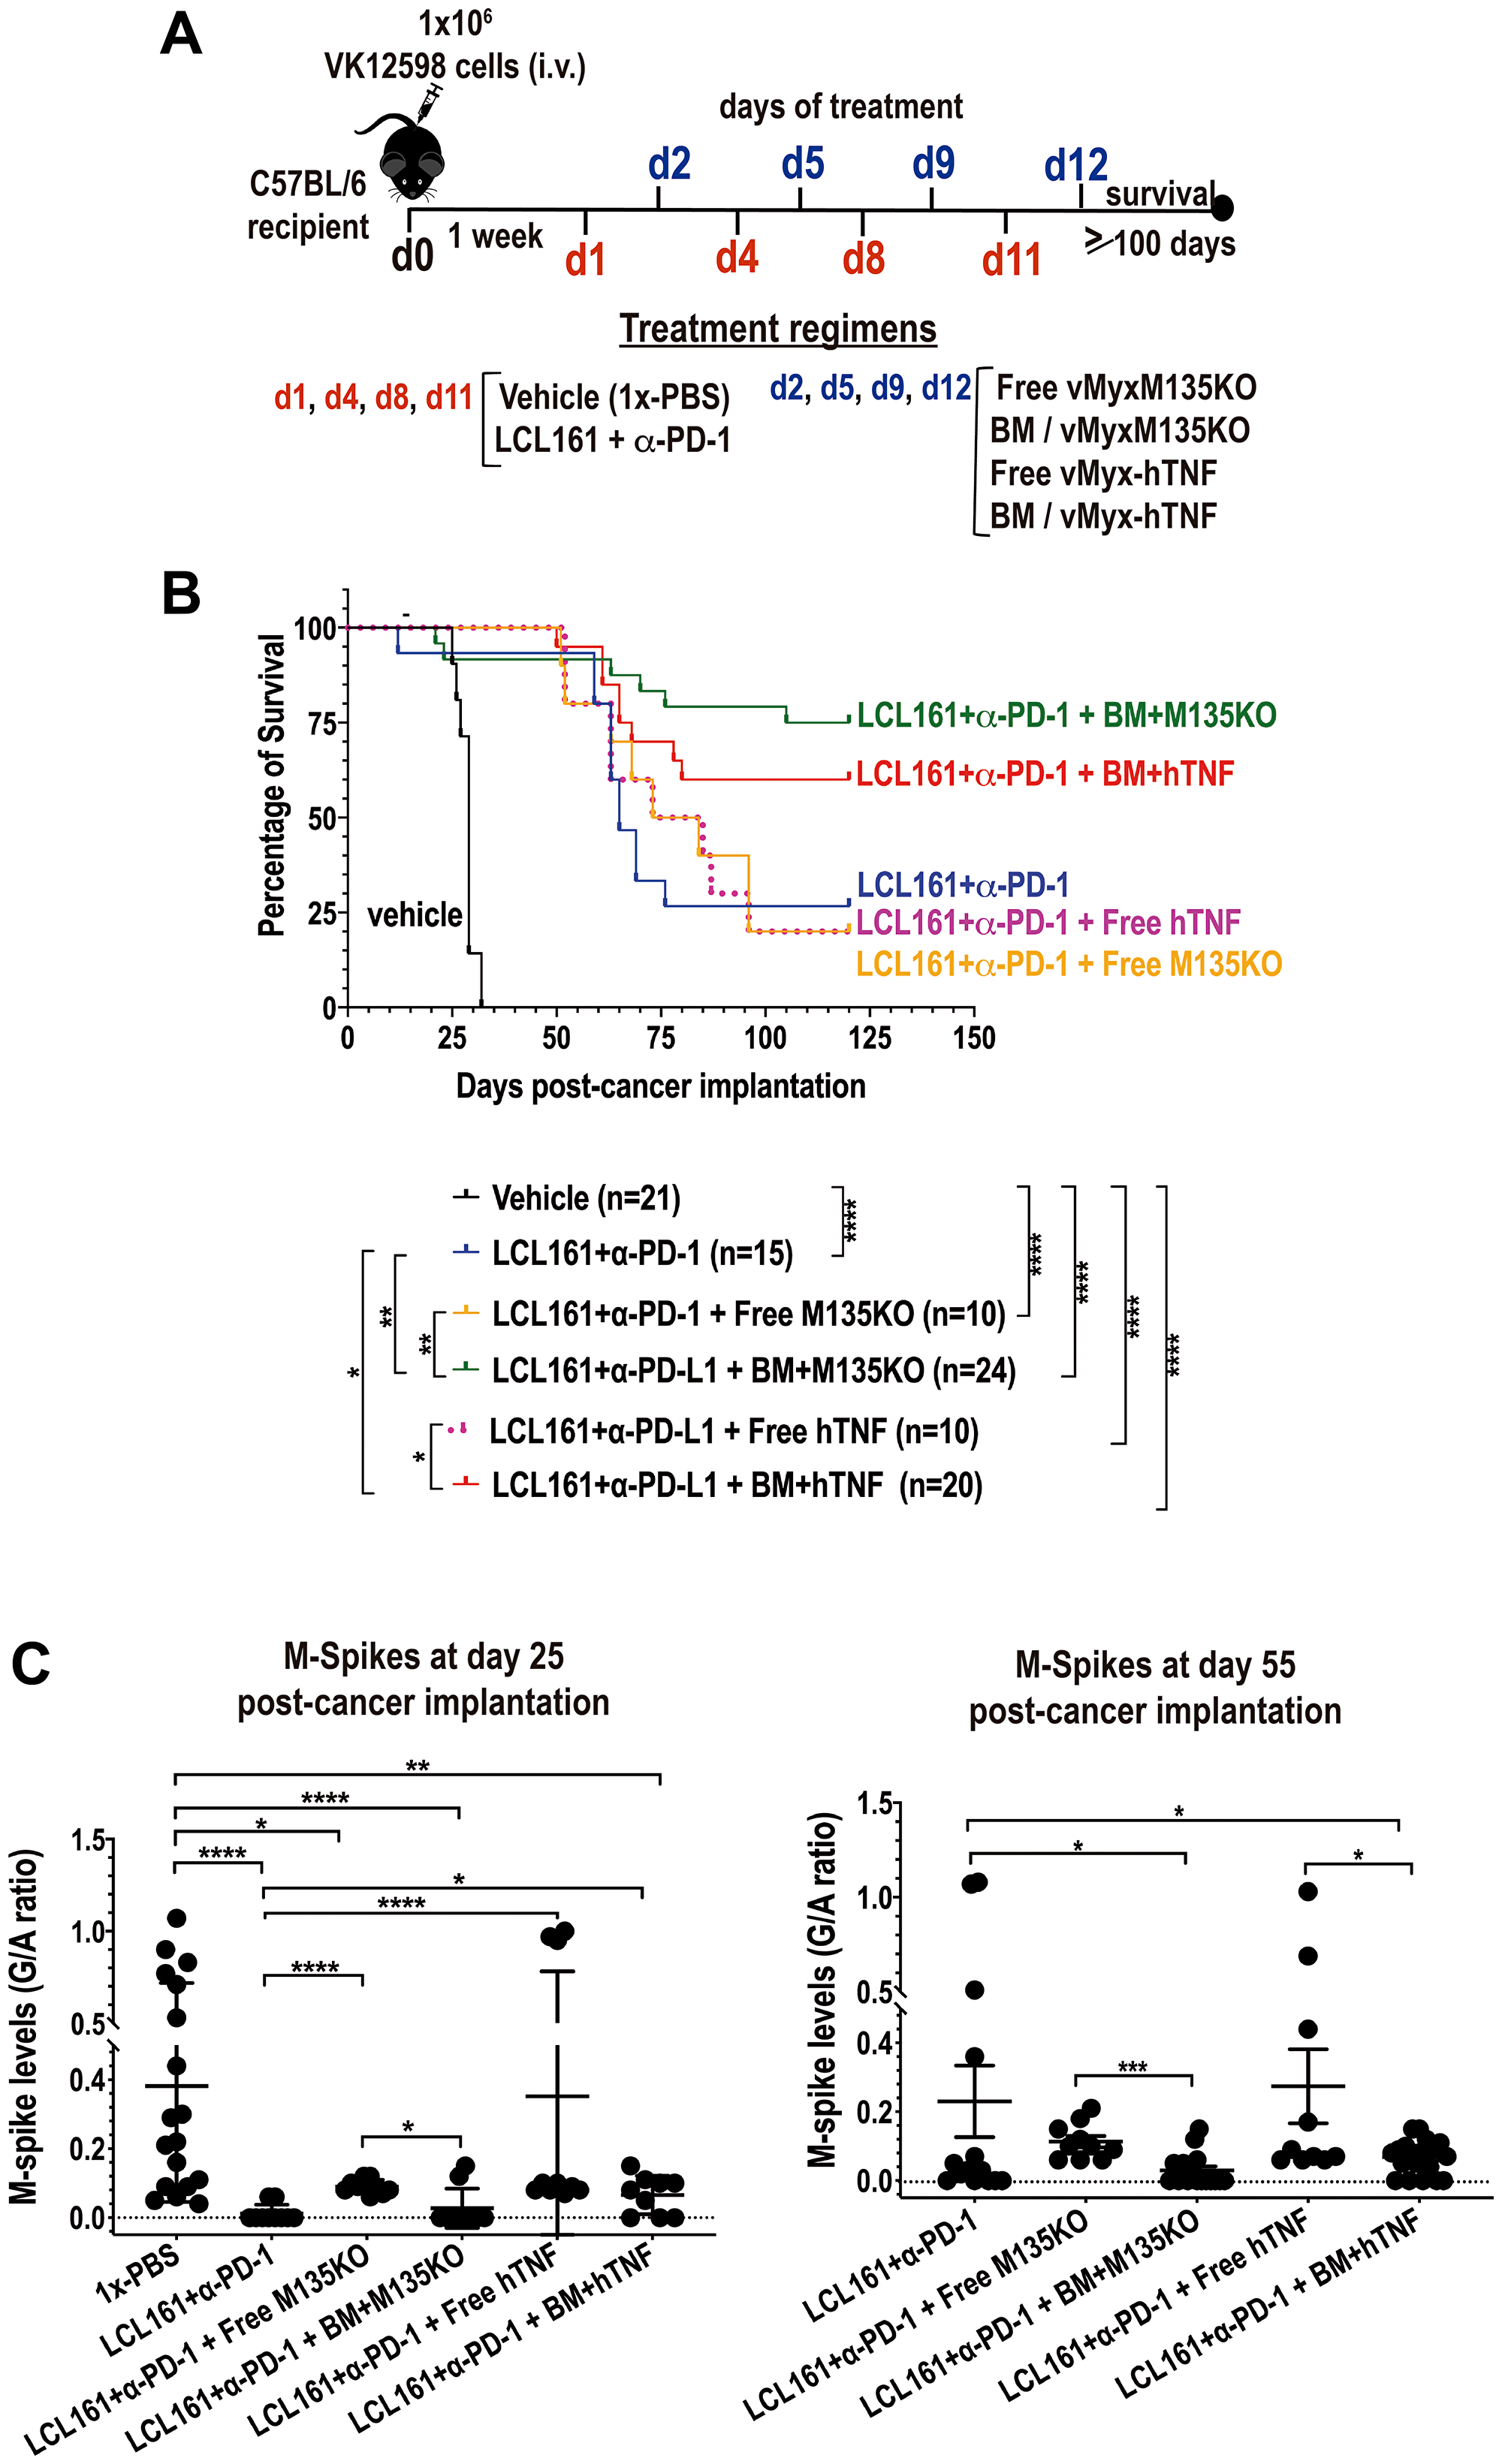 Autologous BM ex vivo preloaded with either un-armed MYXV, or with hTNF transgene armed MYXV synergizes with LCL161 + α-PD-1 against BOR-resistant Vk12598 myeloma cells in vivo.